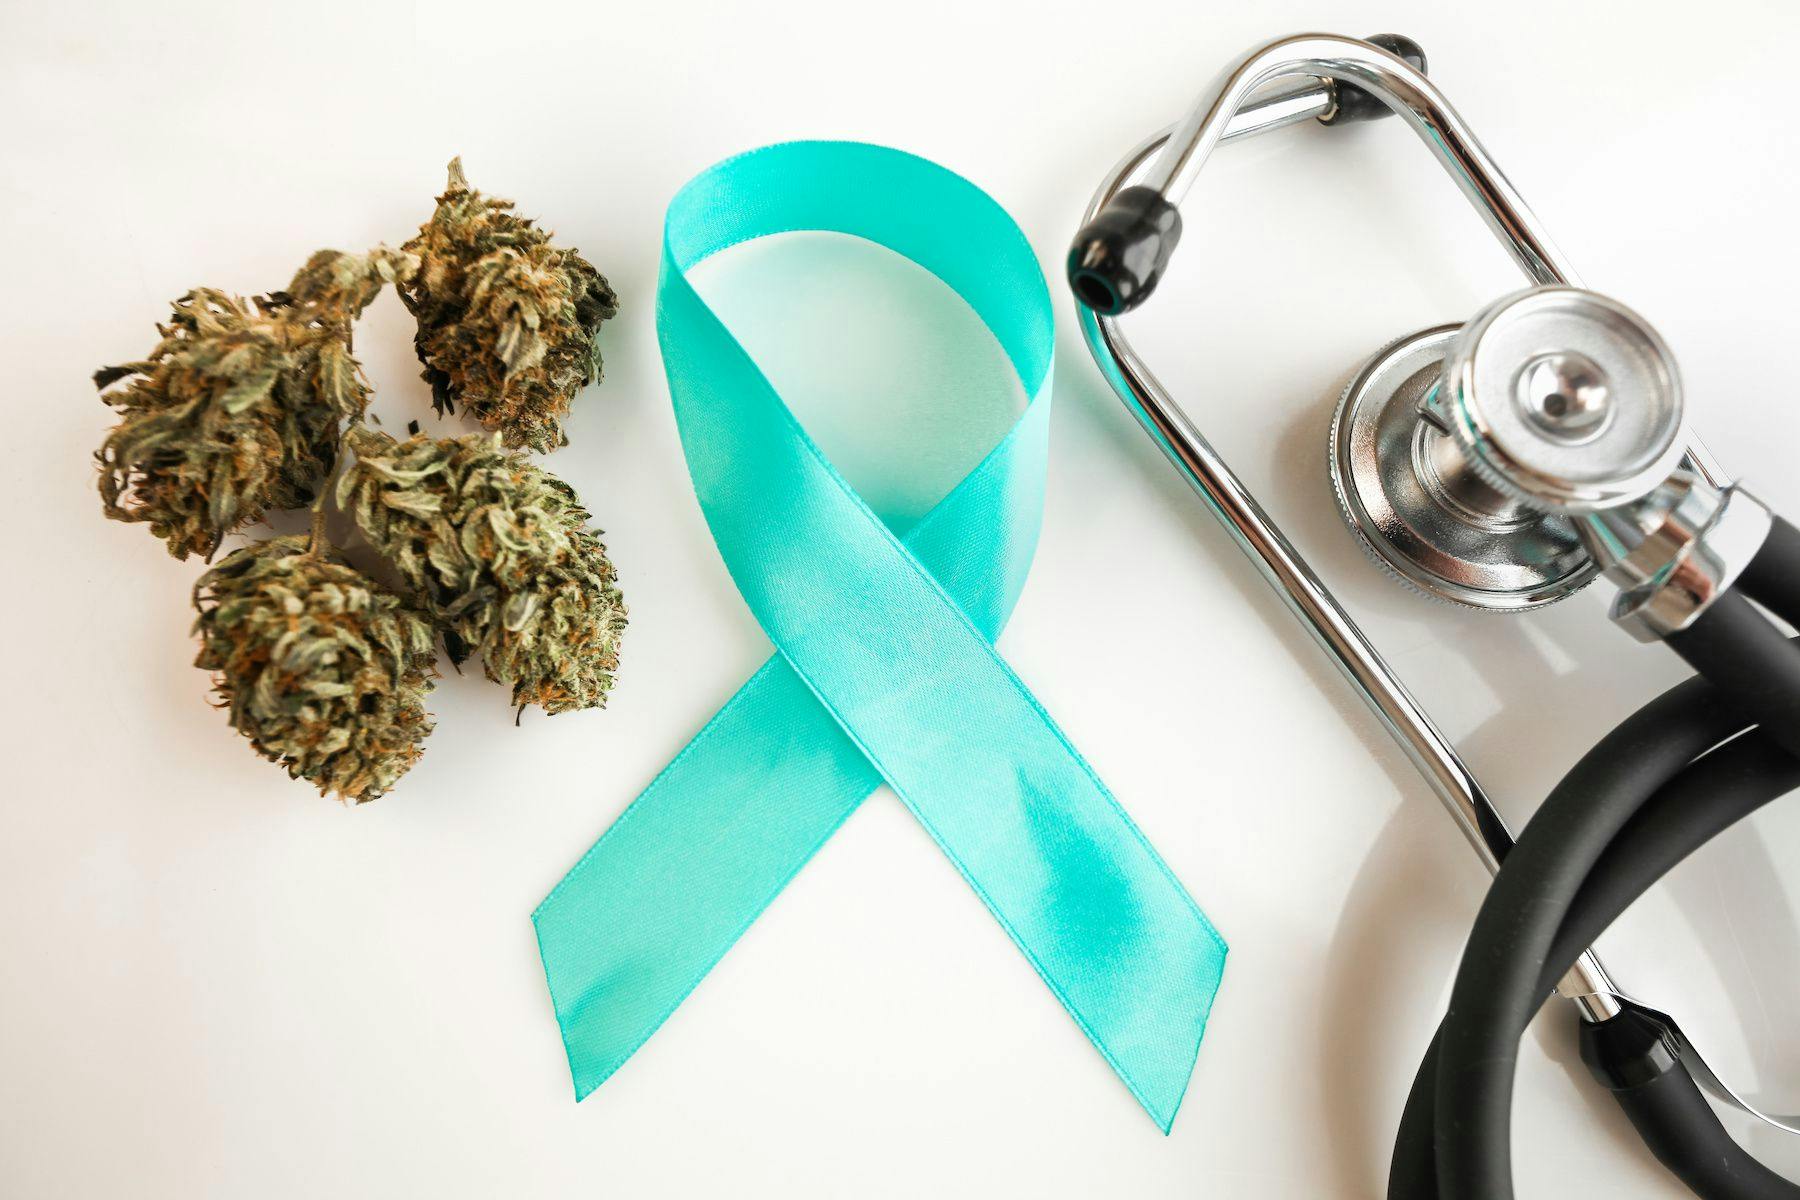 Cannabis to Treat Cancer: Younger Populations Reluctant to Disclose as Overall Use Becomes More Accepted